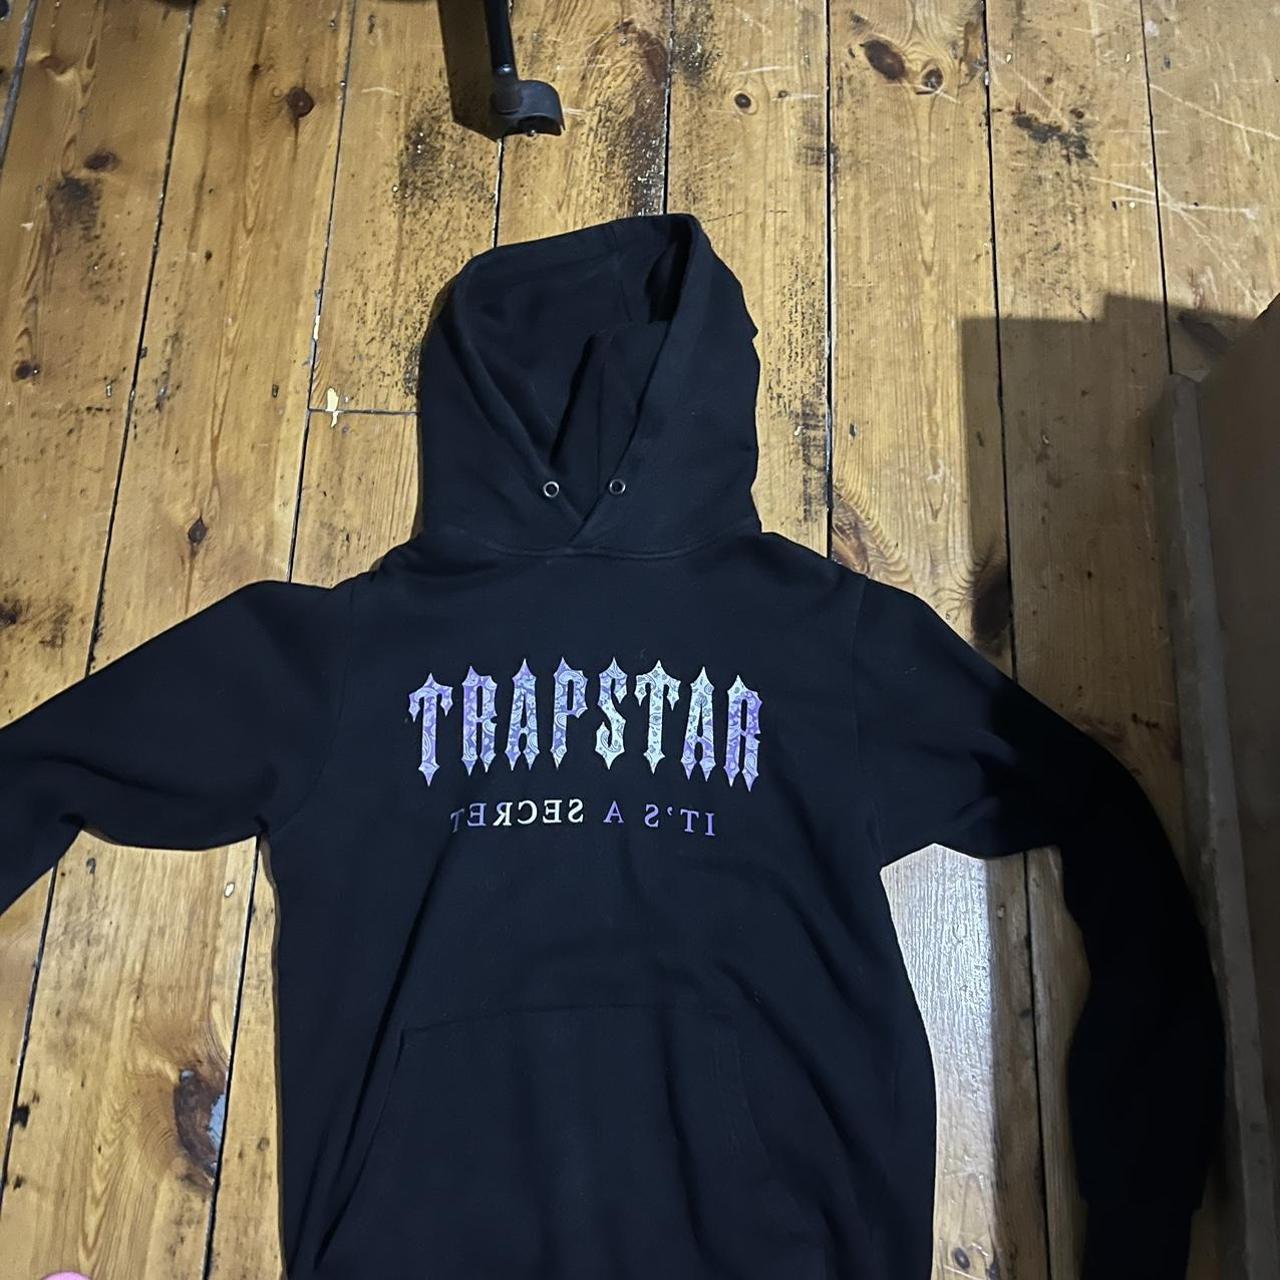 Trapstar Jumper Size S/M Good condition Willing to... - Depop